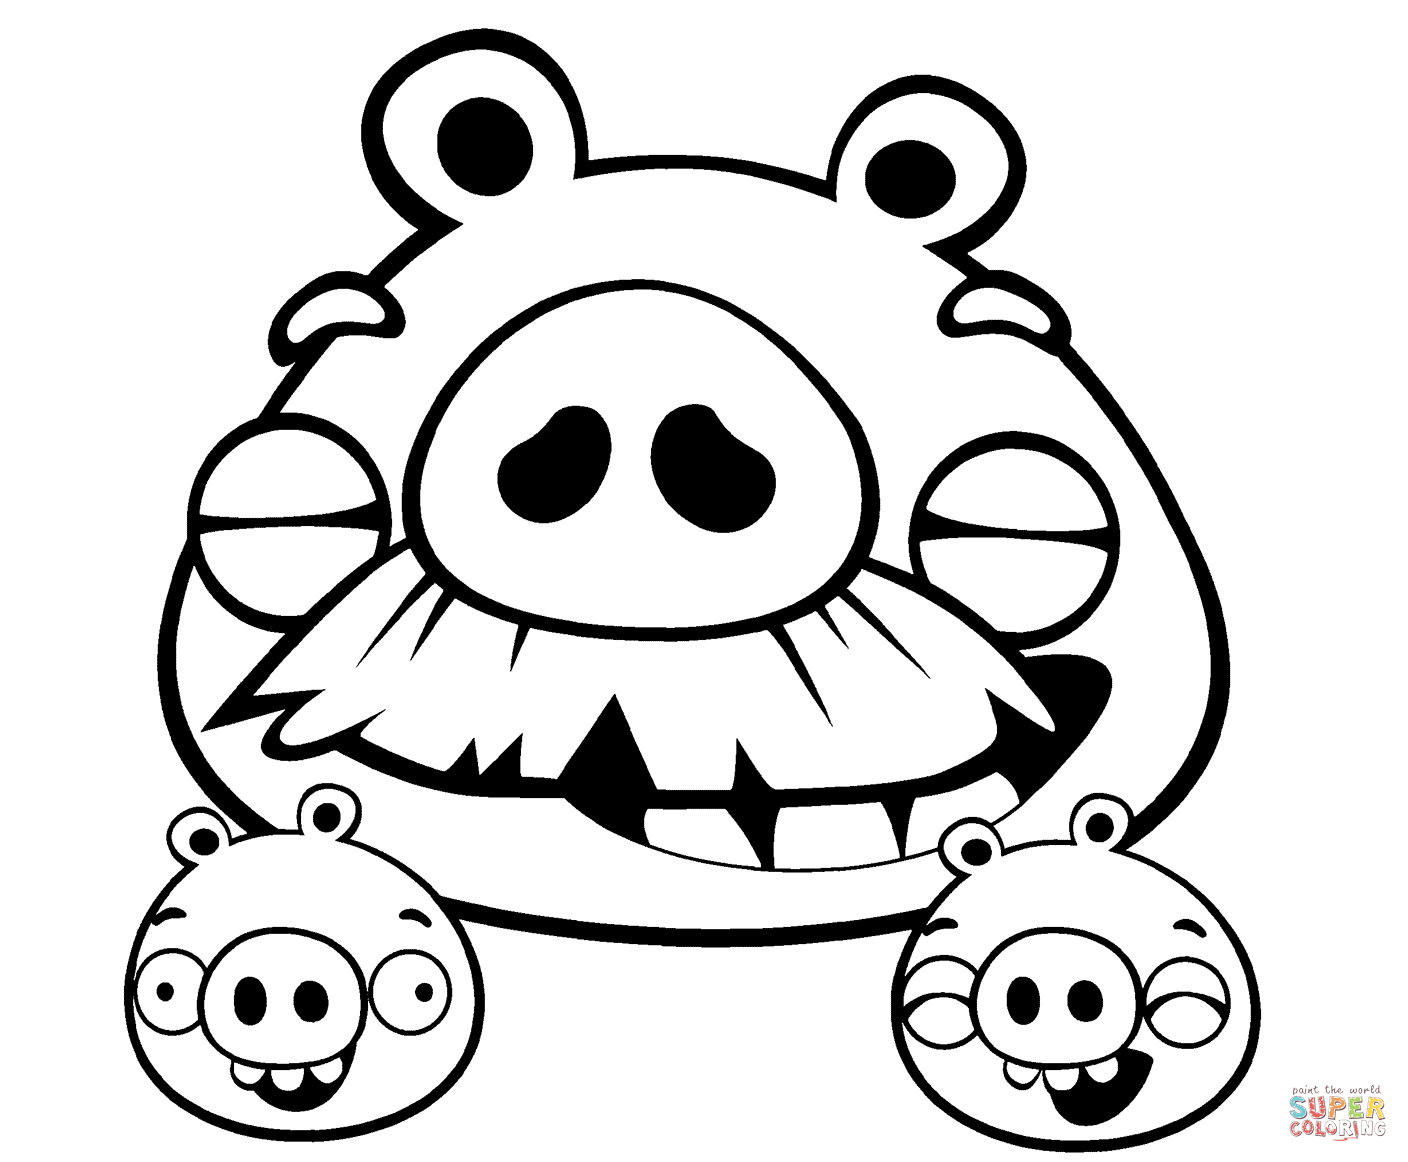 Foreman pig and minions coloring page free printable coloring pages